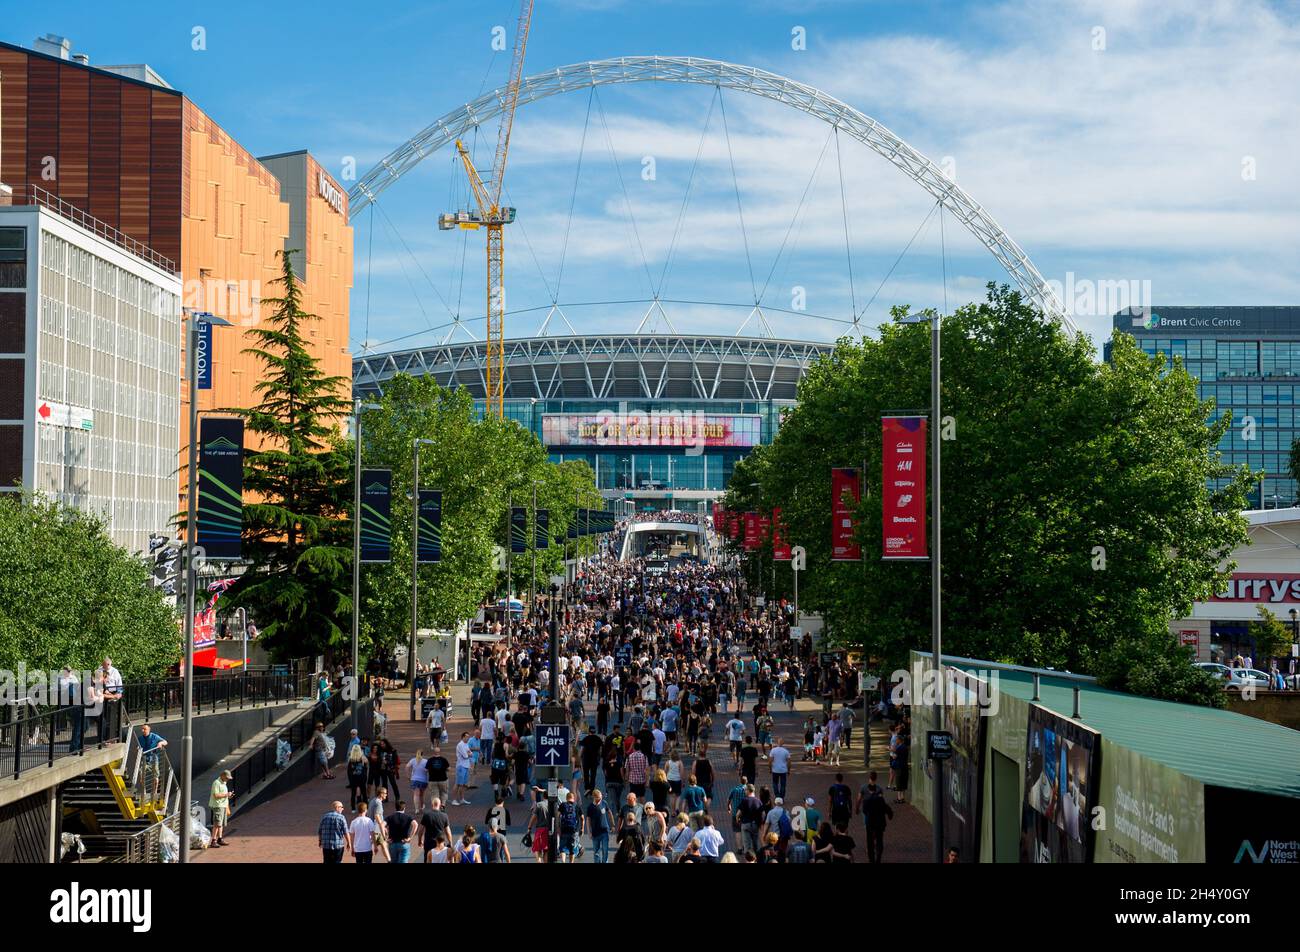 The crowd arriving at AC/DC concert at Wembley Stadium on July 04, 2015 in London, United Kingdom Stock Photo